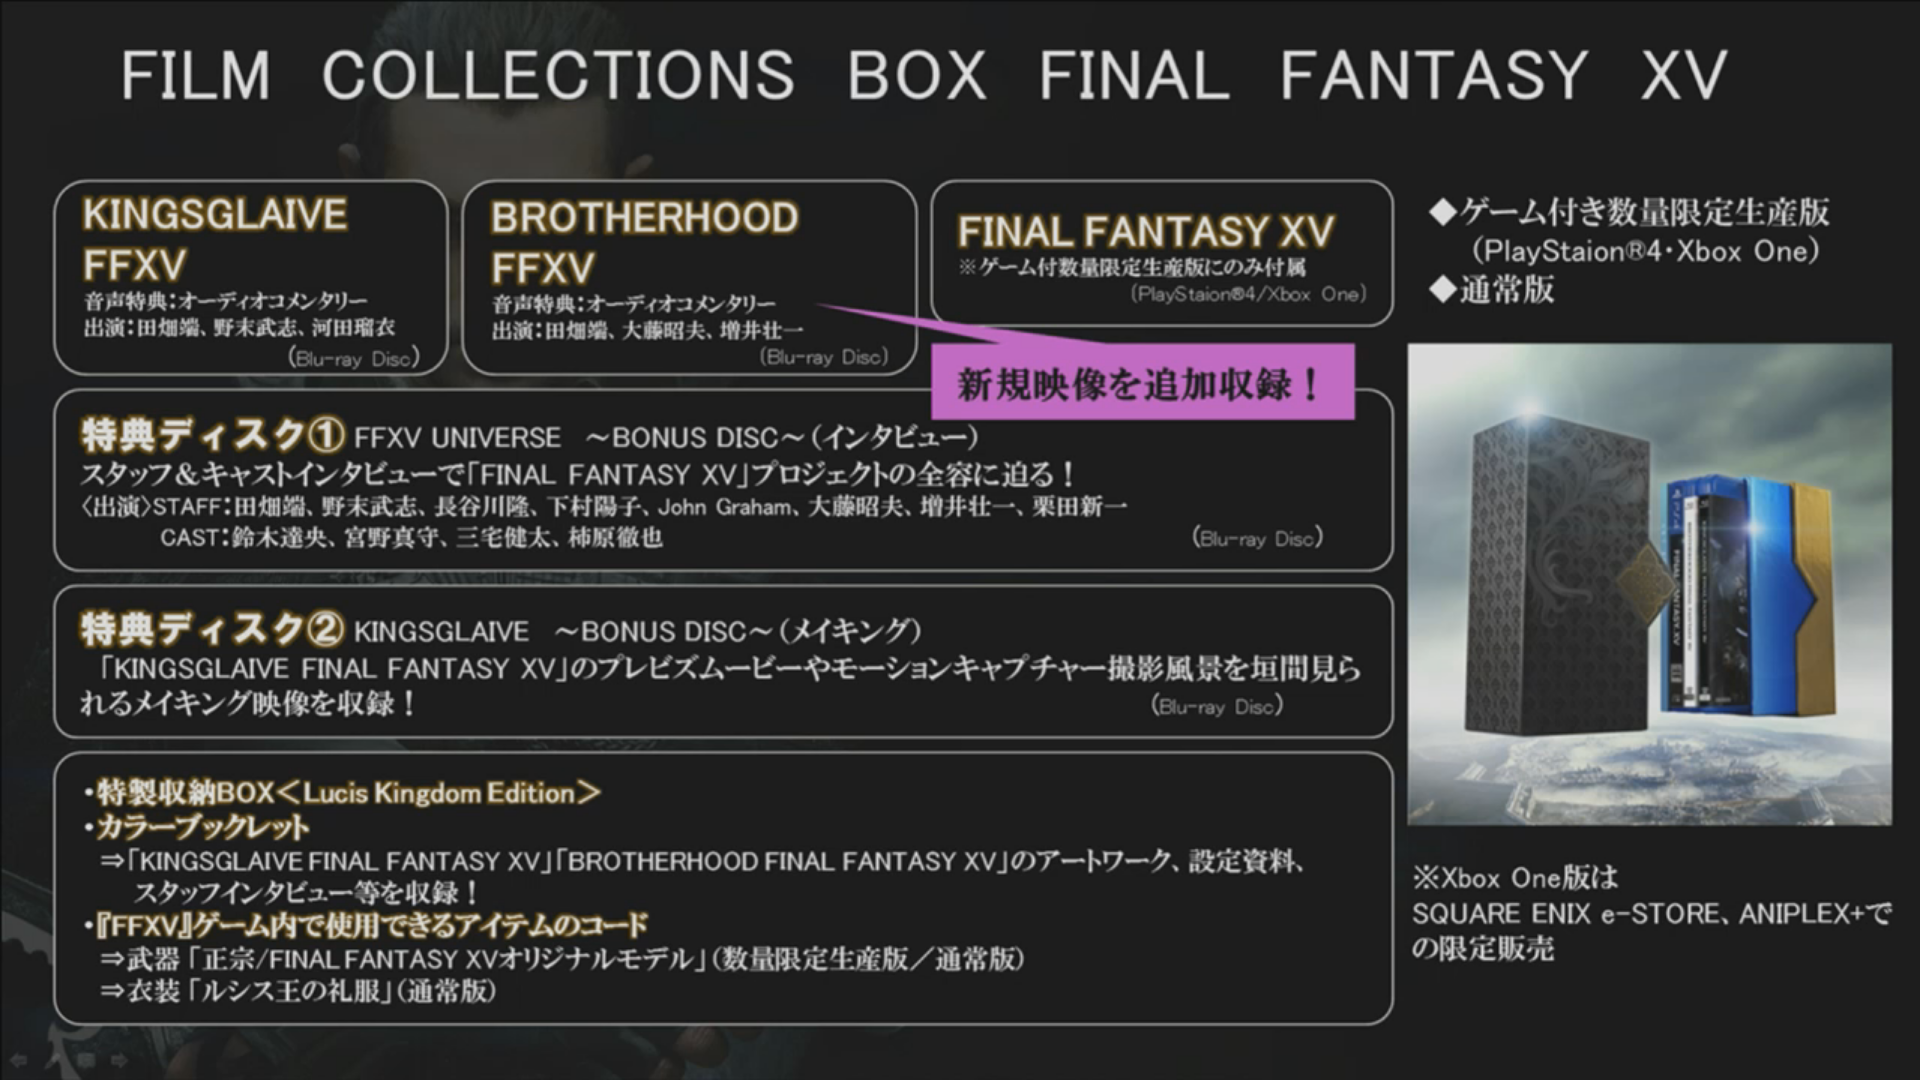 Final Fantasy XV “Film Collections Box” Special Edition with Game 